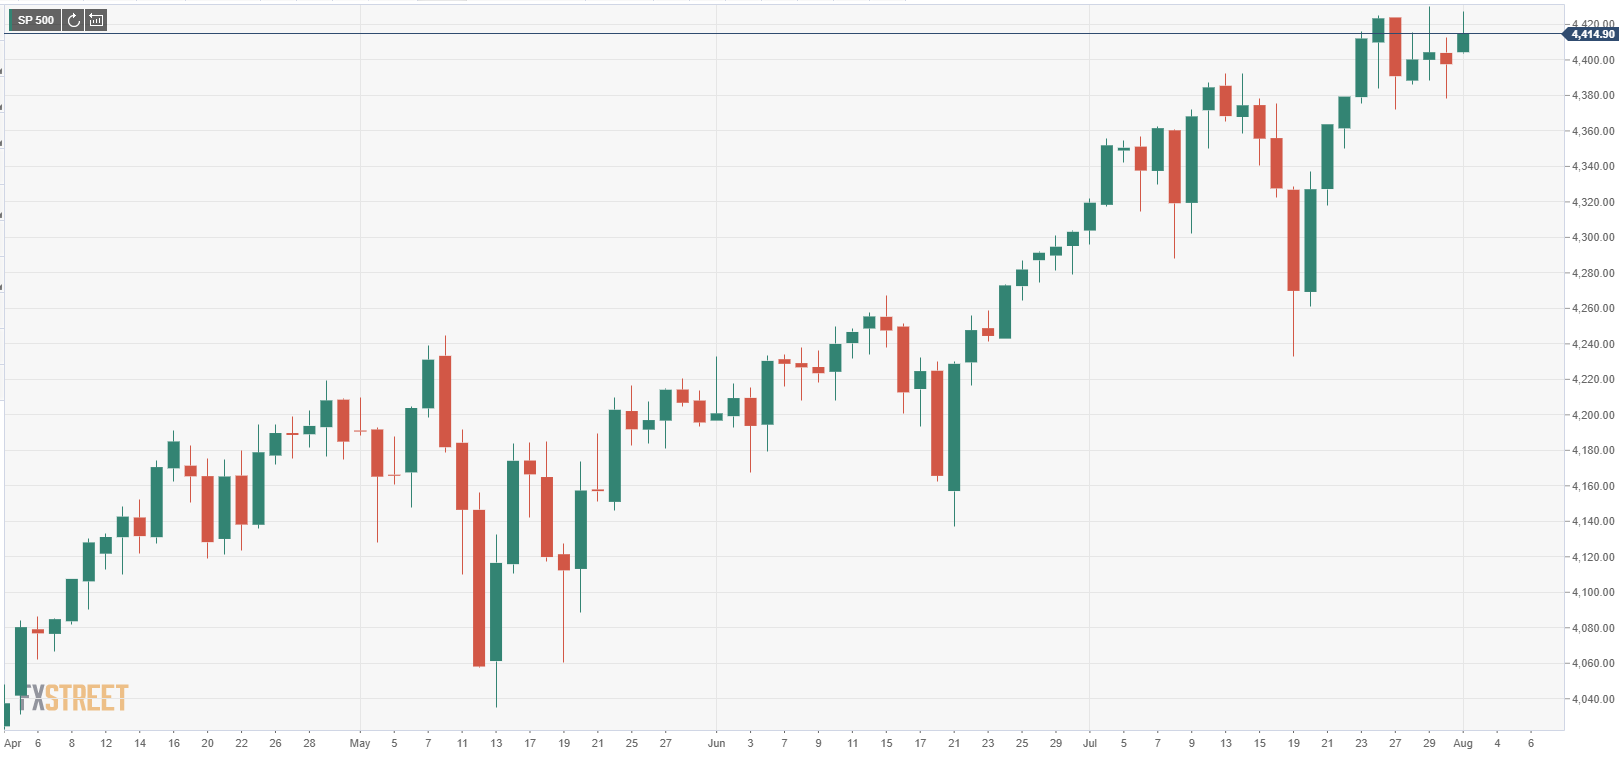 S&P 500 Index Opens in Positive Territory Above 4,400